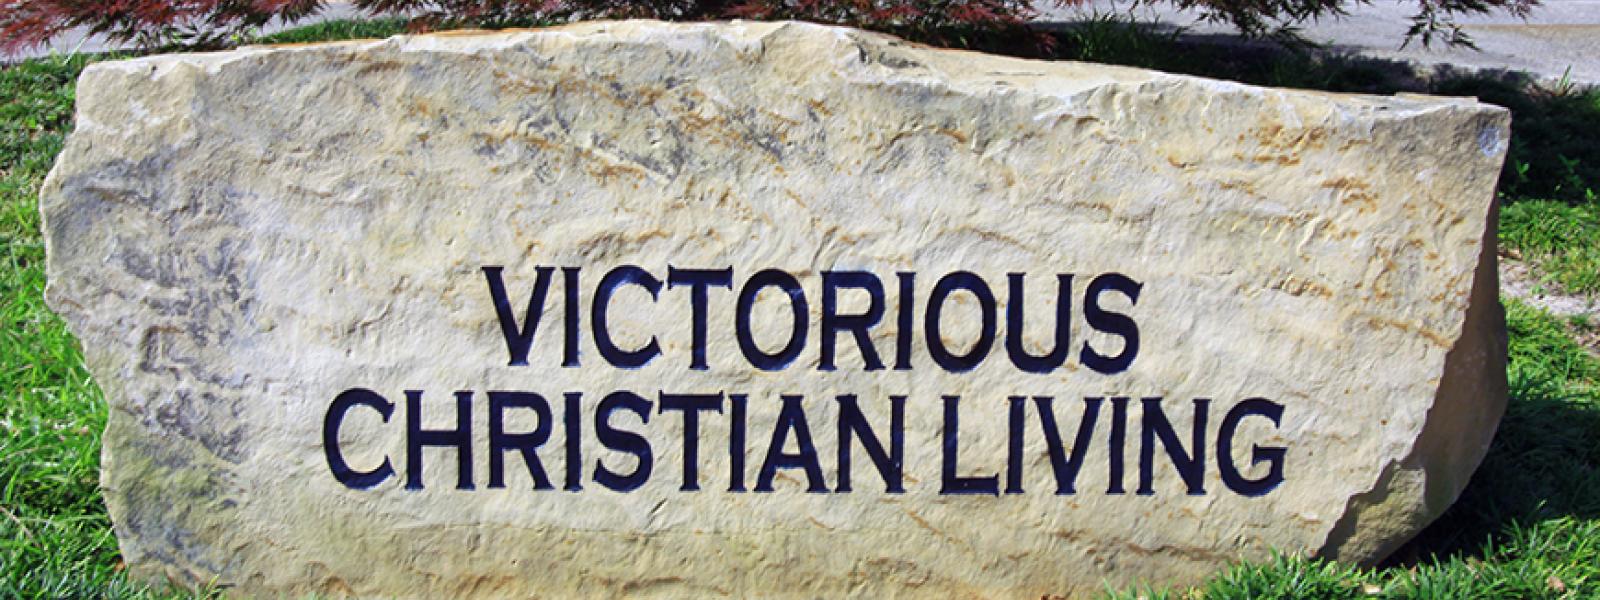 Victorious Christian Living Core Value Stone 